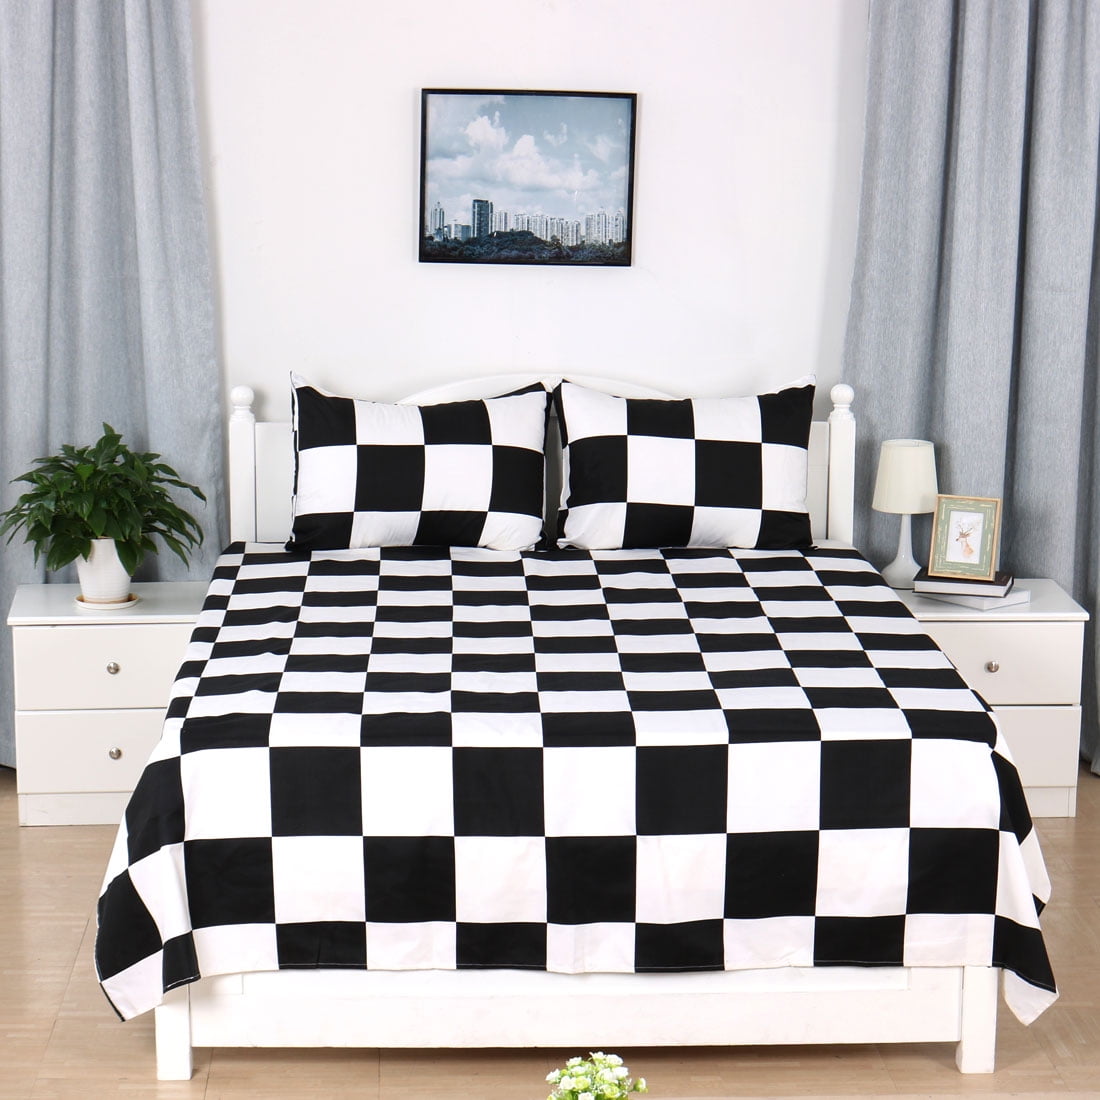 Bedroom Square Grid Pattern Soft Bed Sheet Pillow Cover Bedding Set Queen Size | Walmart Canada